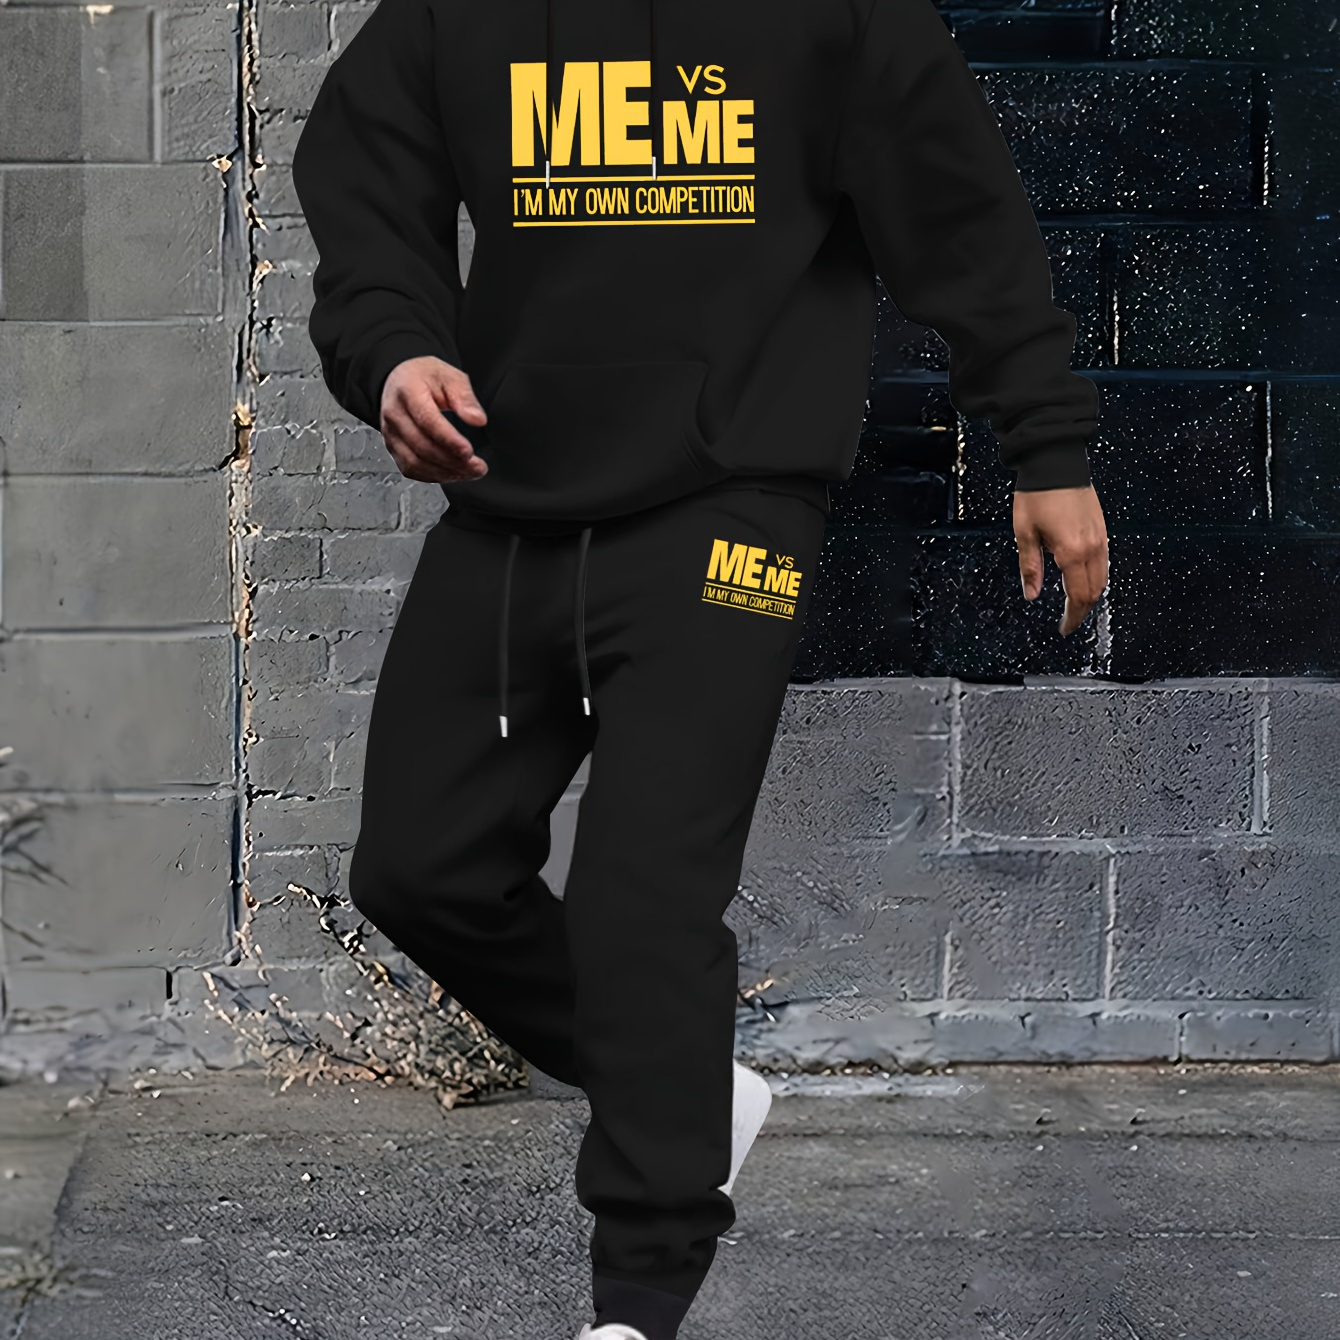 

Me Vs Me I Am My Own Competition Print Men's 2pcs Outfits Casual Crew Neck Long Sleeve T-shirt Hooded Sweatshirt & Drawstring Sweatpants Joggers Set For Winter Fall Men's Clothing